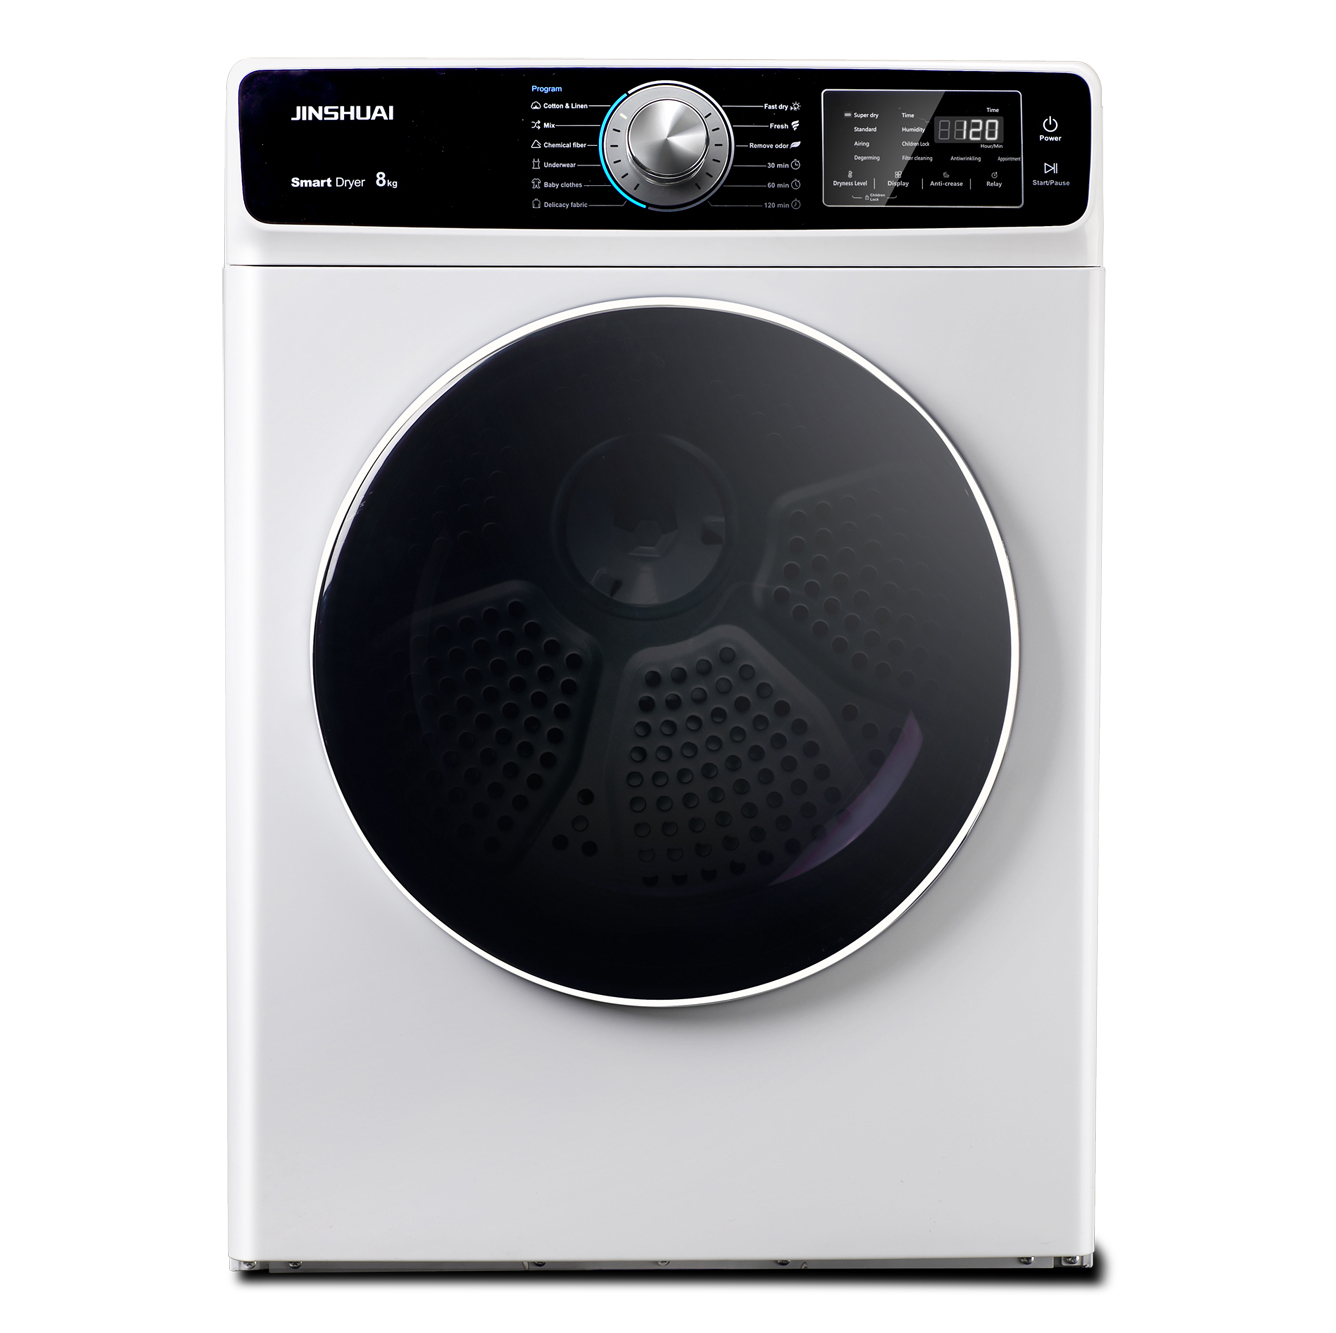 AIR VENTED TUMBLE DRYER